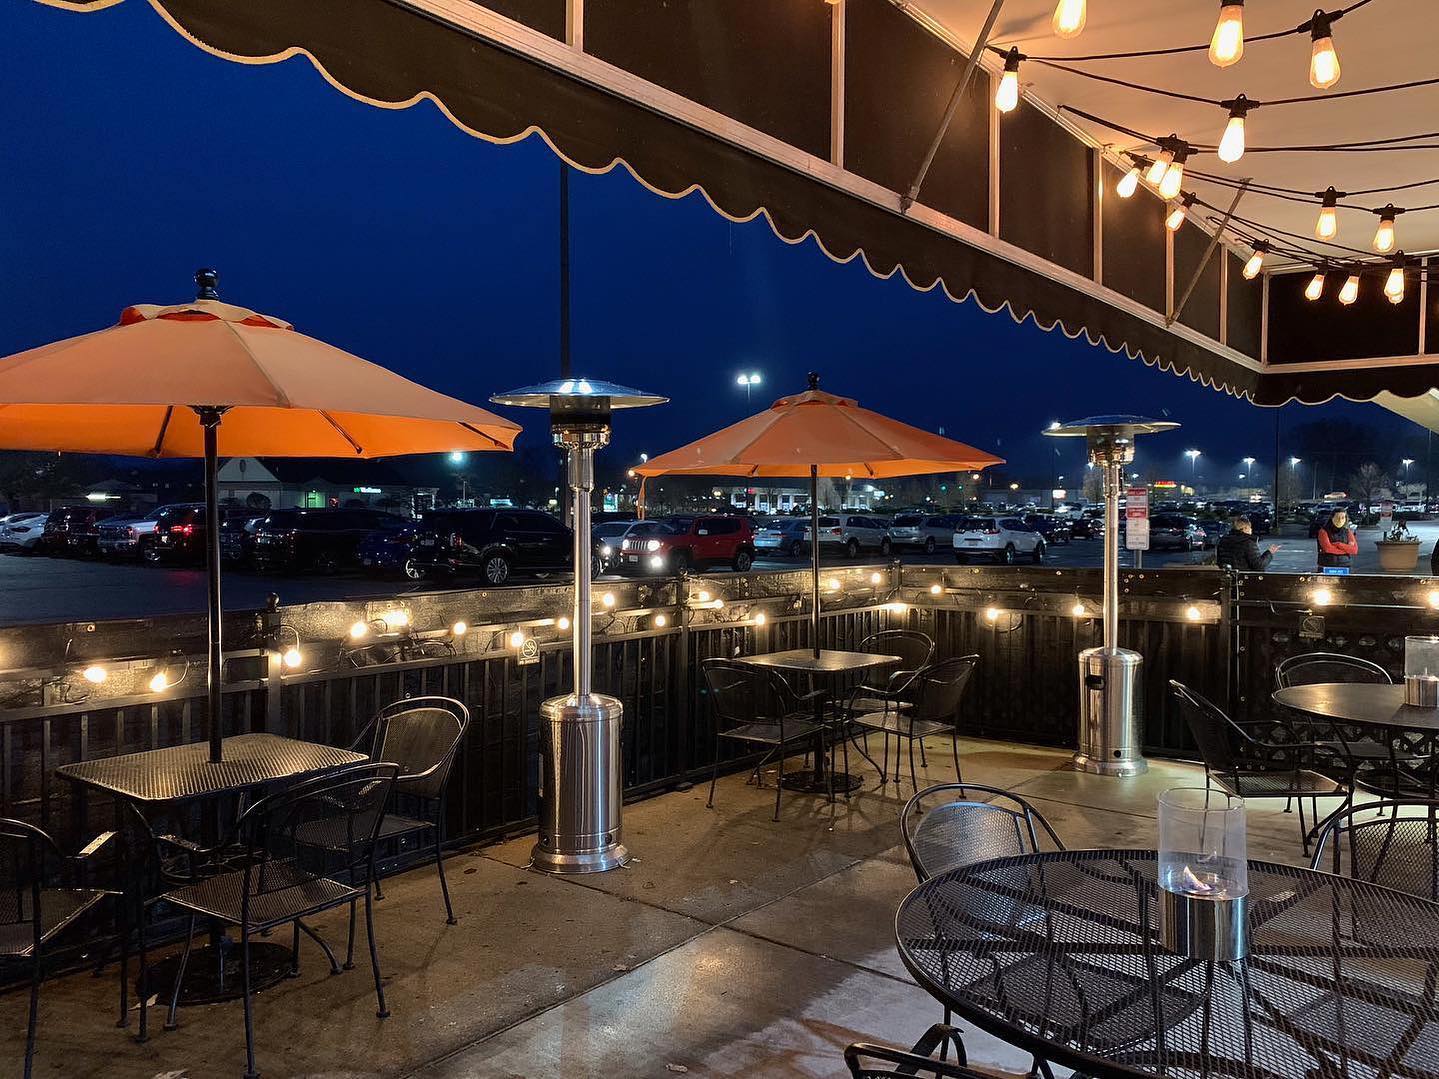 Outdoor Patio At Night At Lock 27 Brewing-Centerville